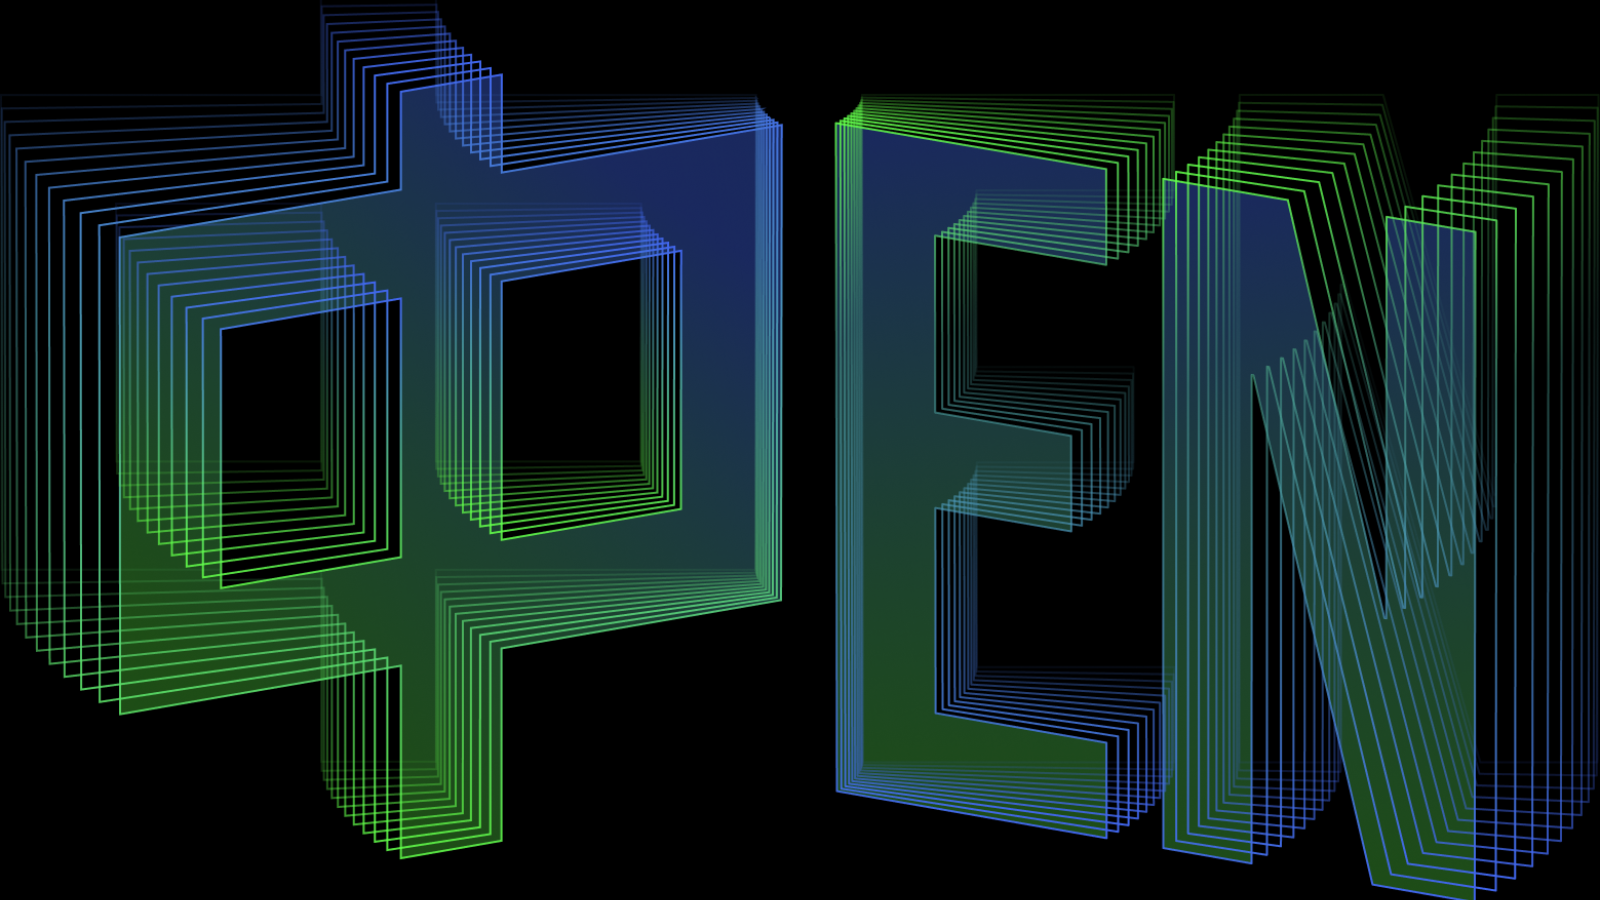 Colorful 3D text "OPEN" in green and blue on a black background creating a vibrant effect